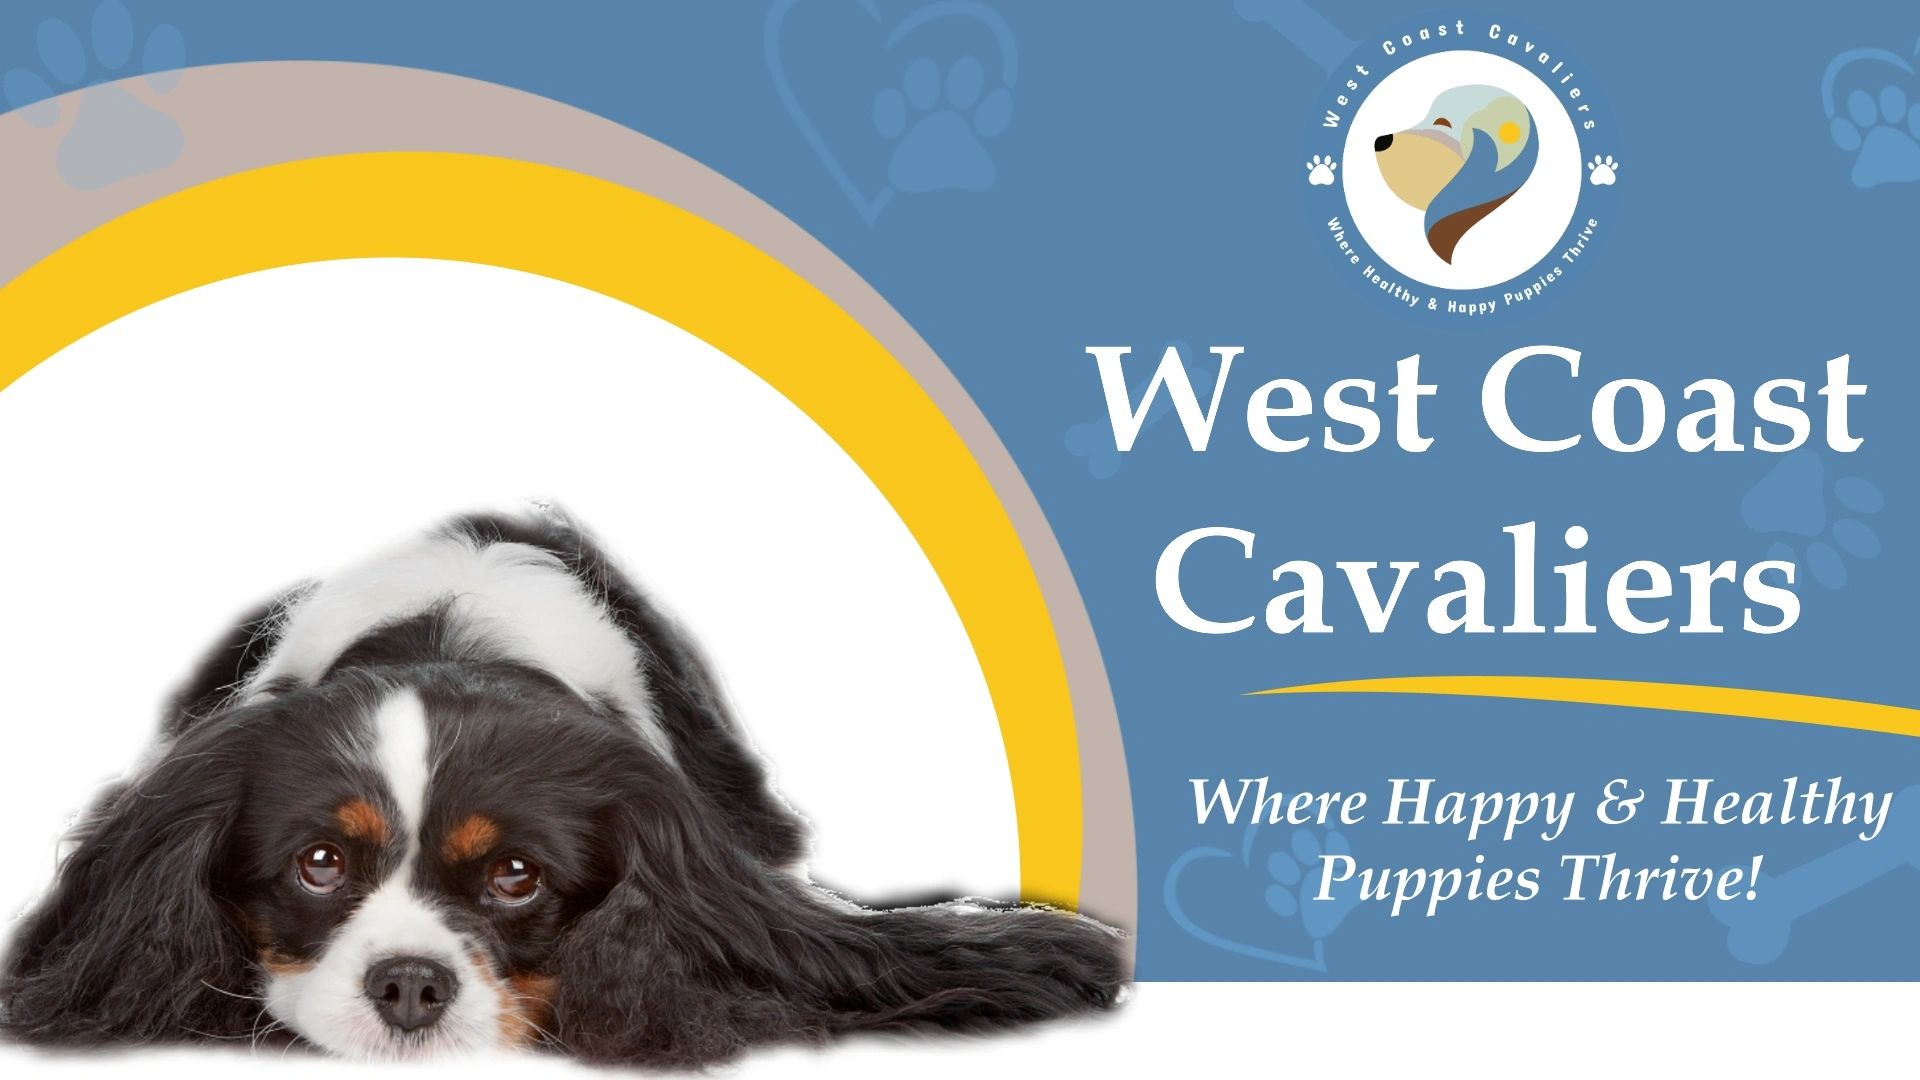 West Coast Cavaliers Puppies for Sale